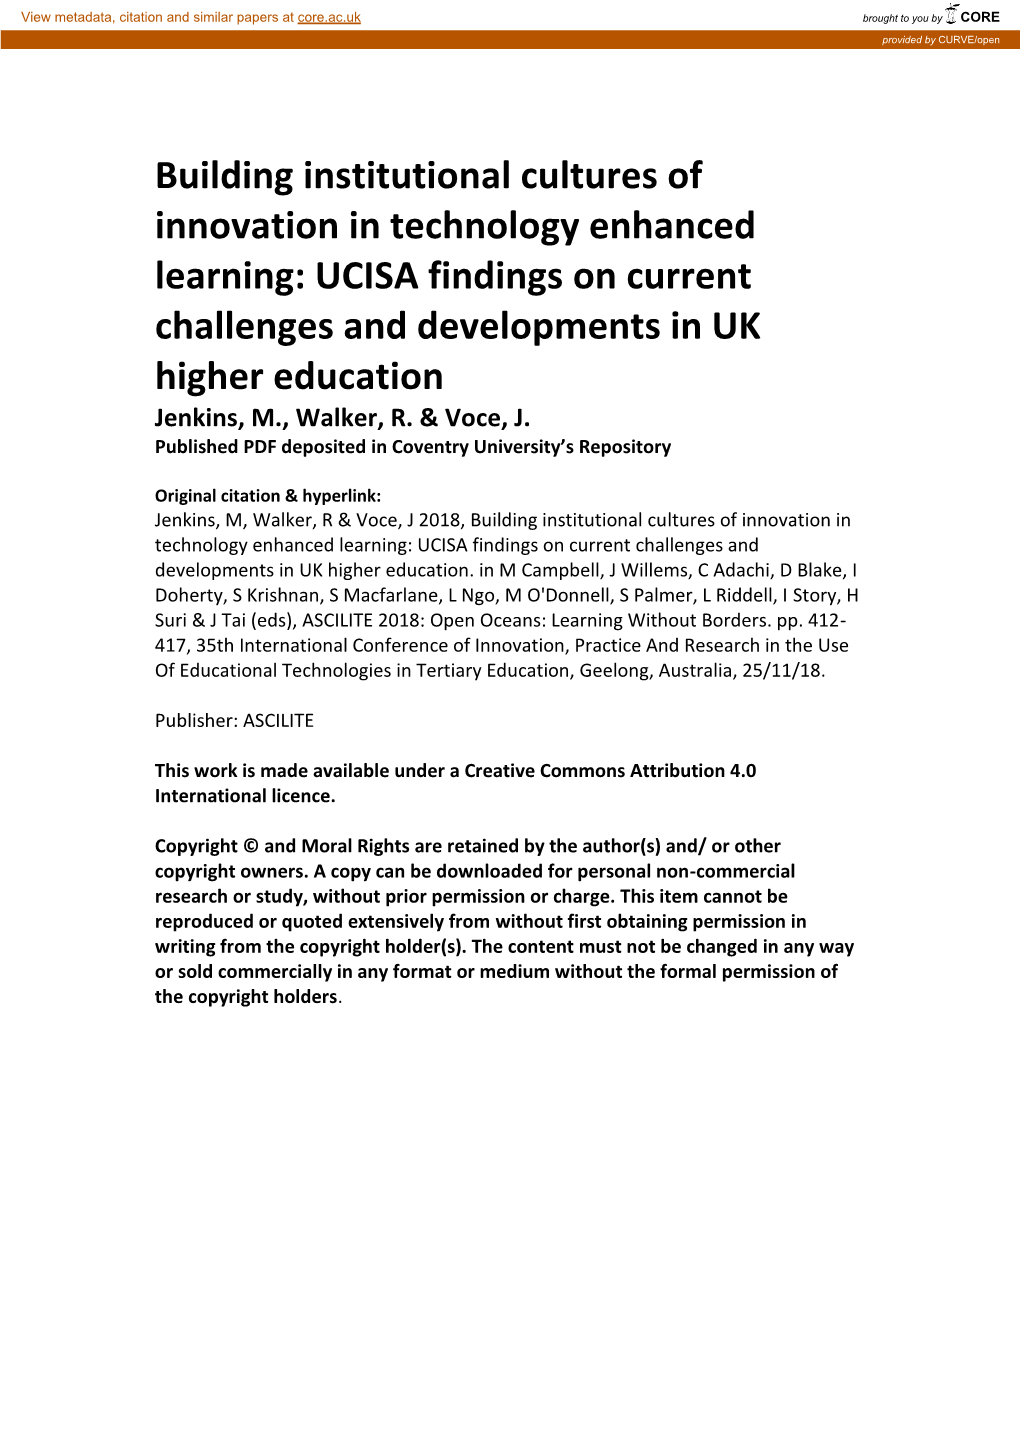 Building Institutional Cultures of Innovation in Technology Enhanced Learning: UCISA Findings on Current Challenges and Developm